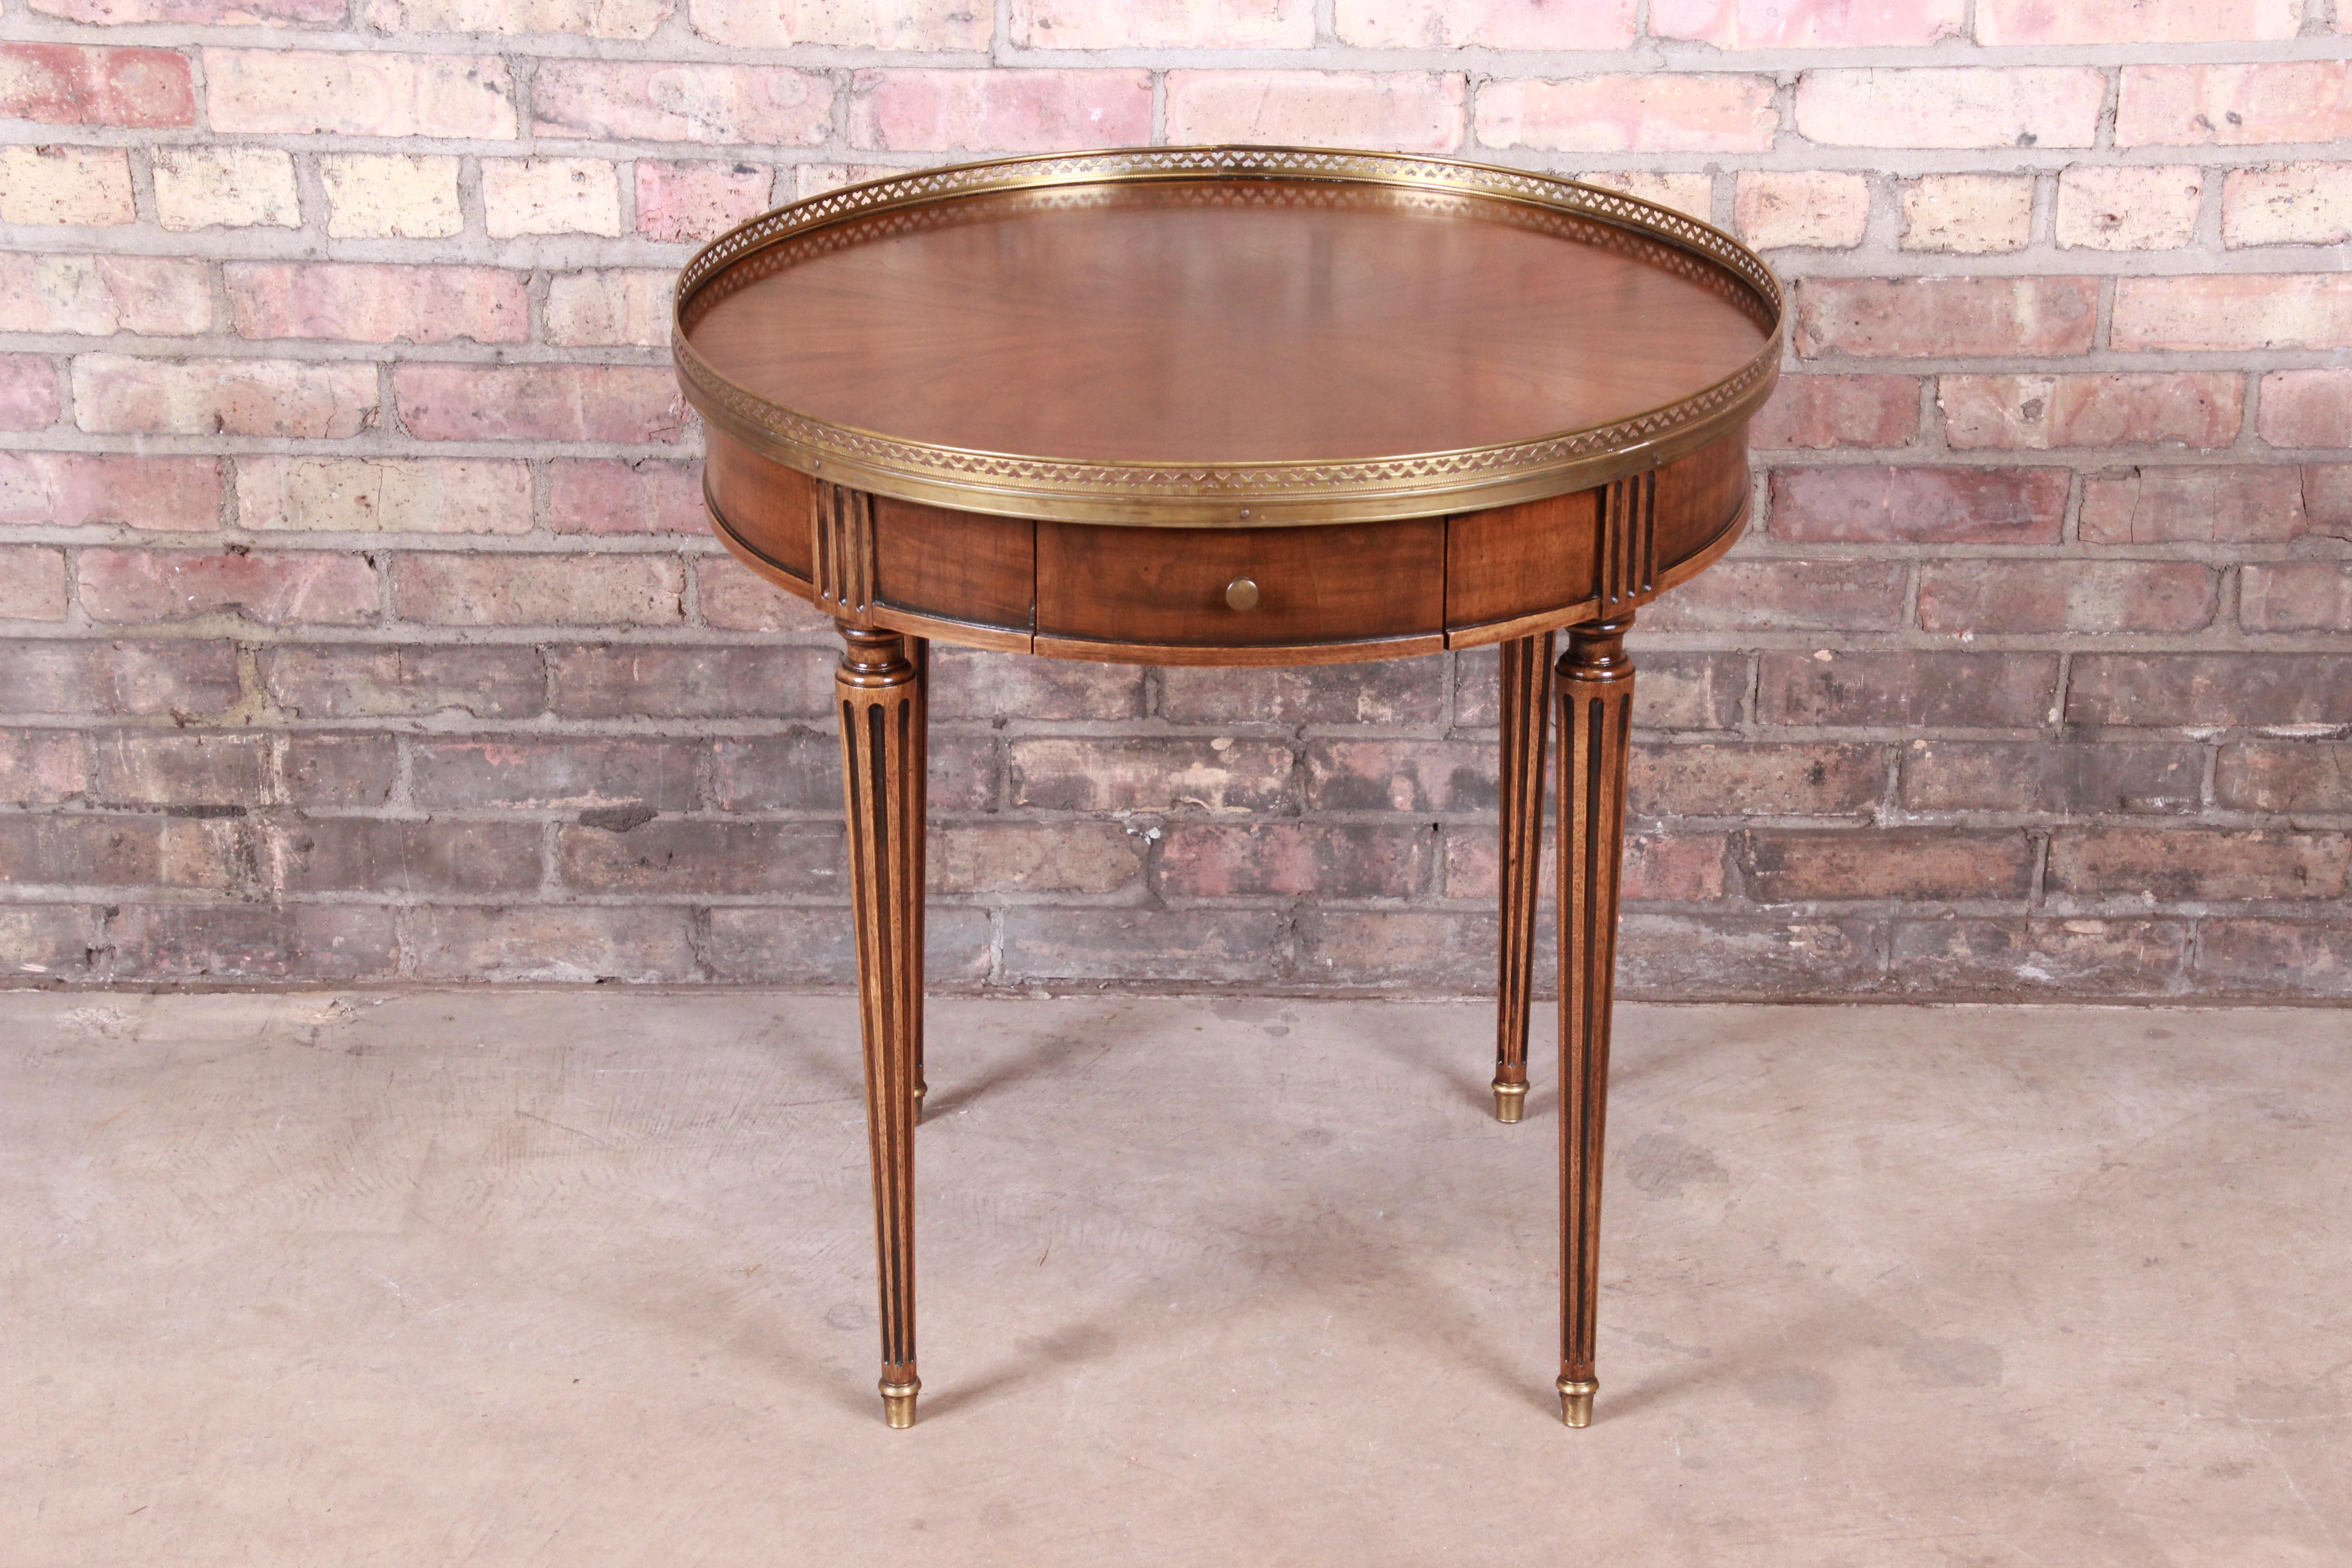 A gorgeous French Regency Louis XVI style tea table

By Baker Furniture 